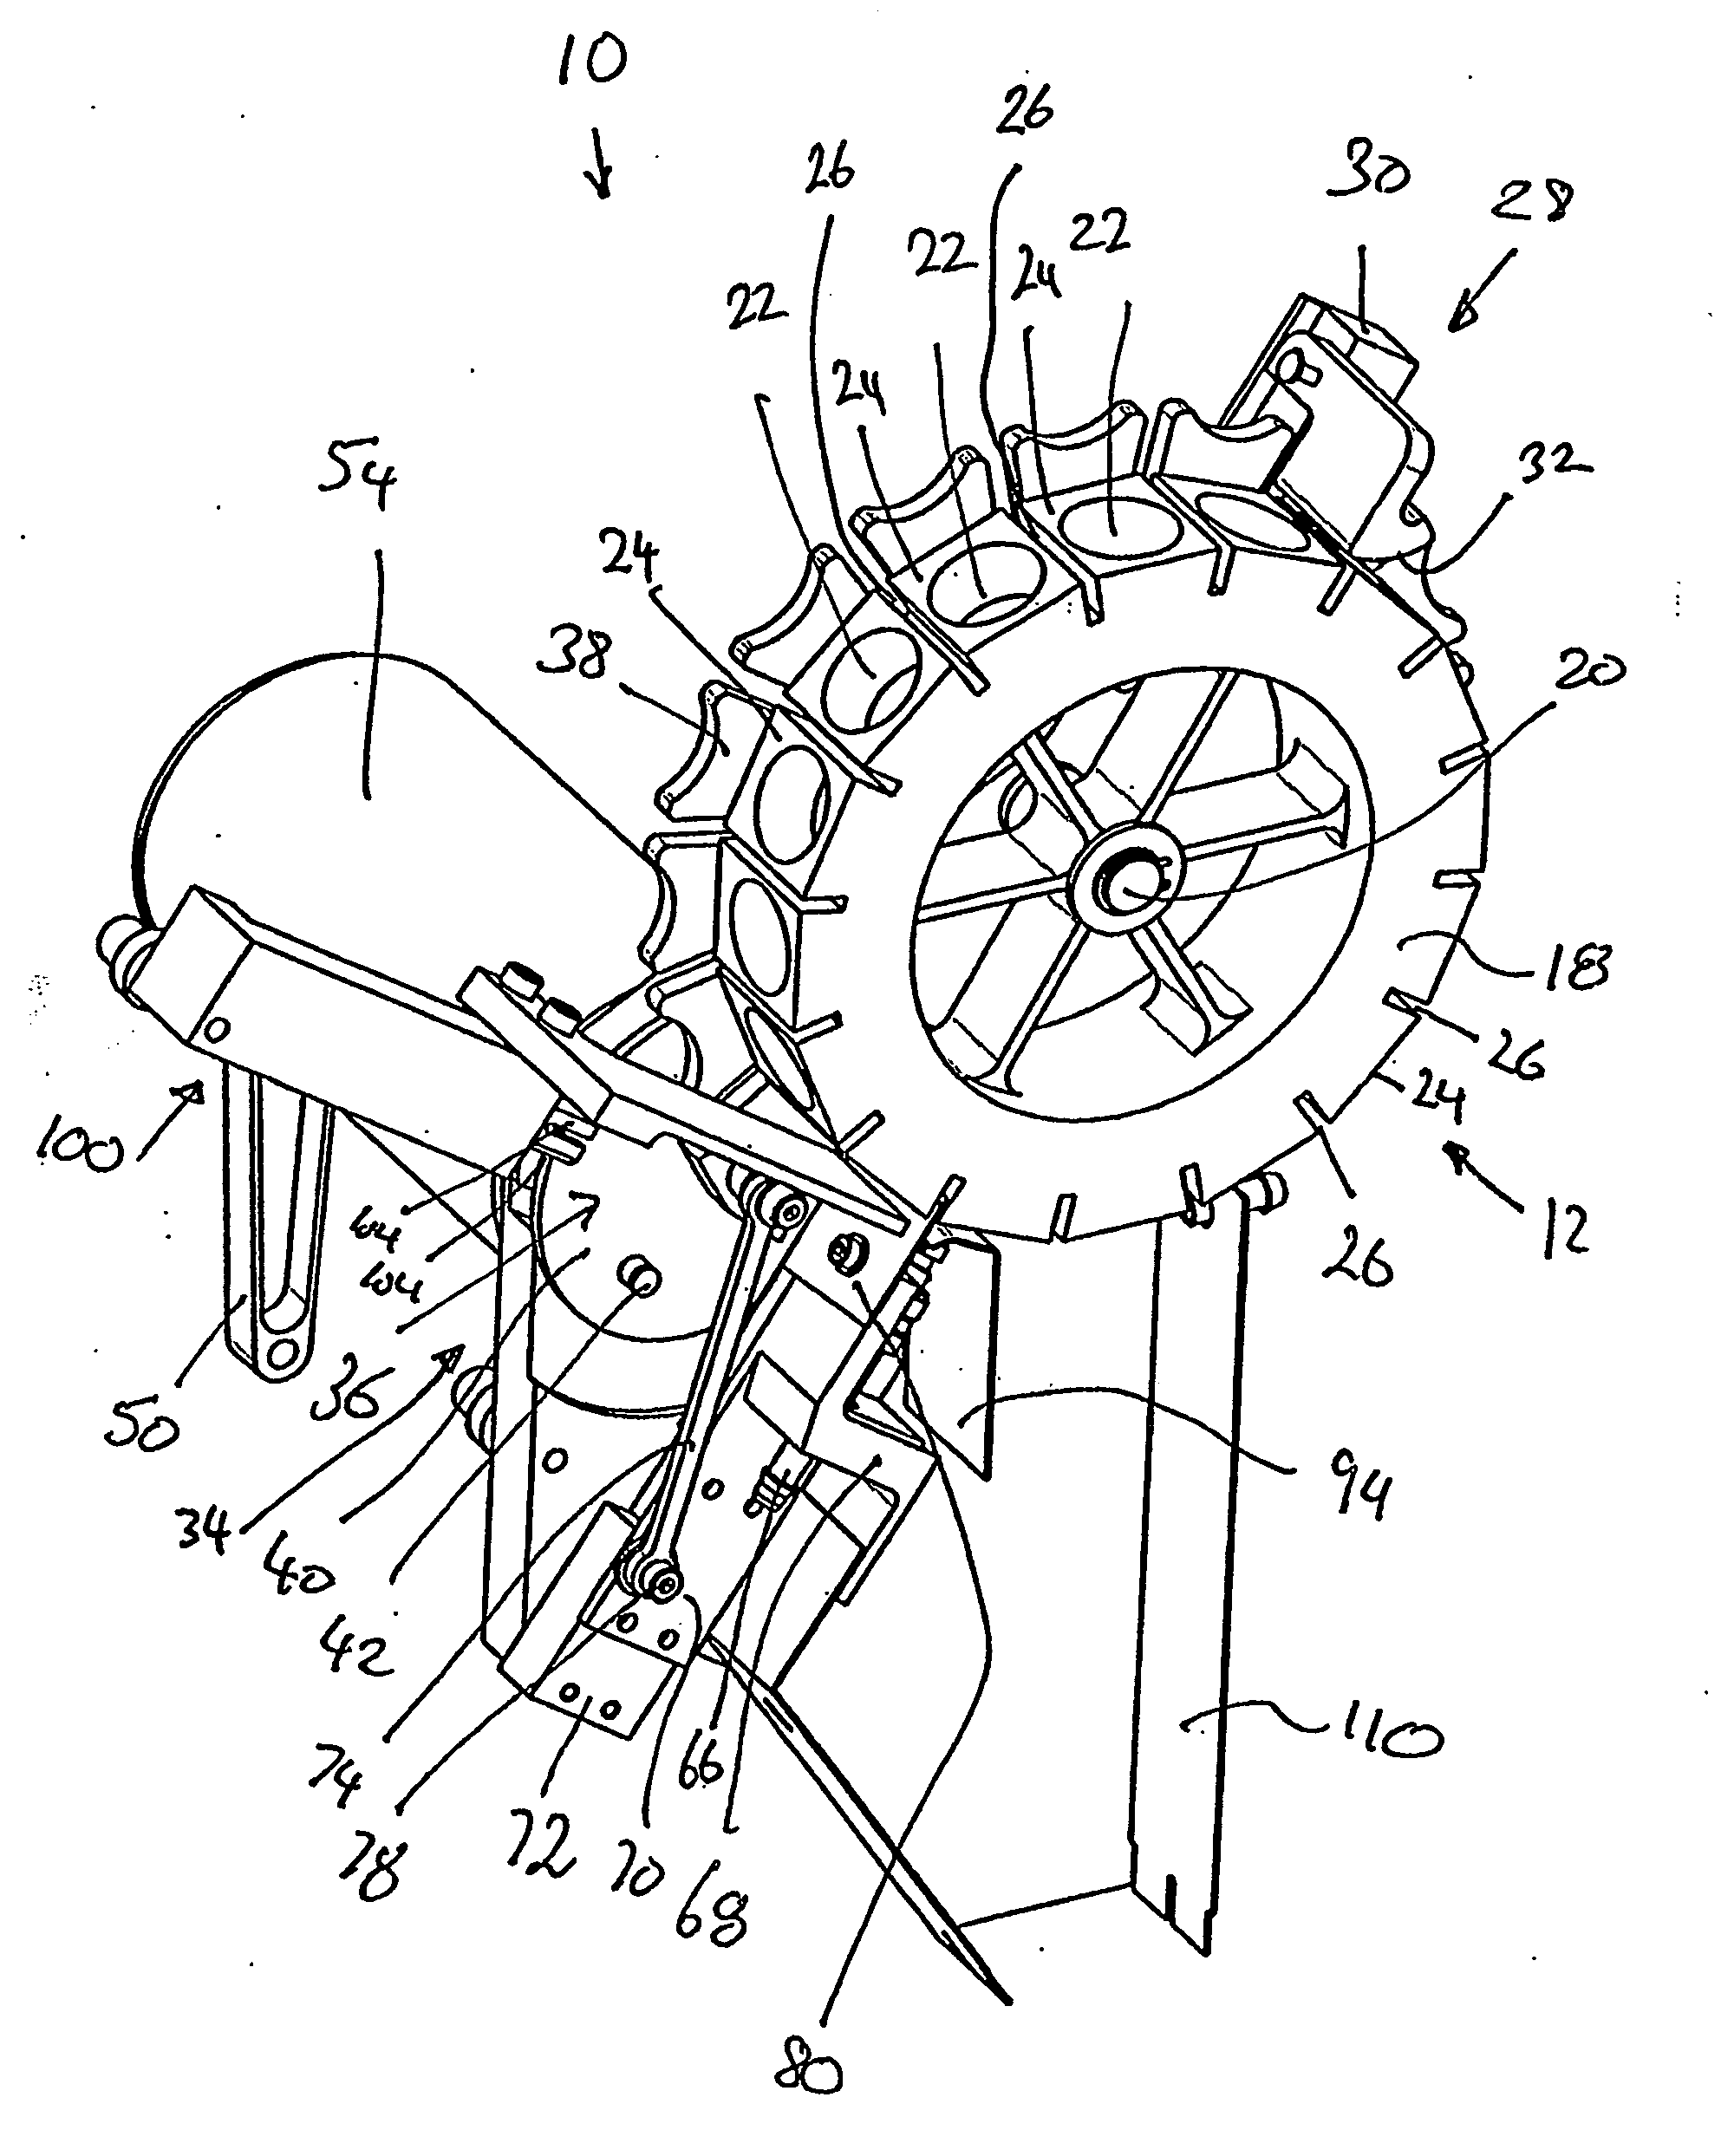 Apparatus for initiating and dispensing an incendiary